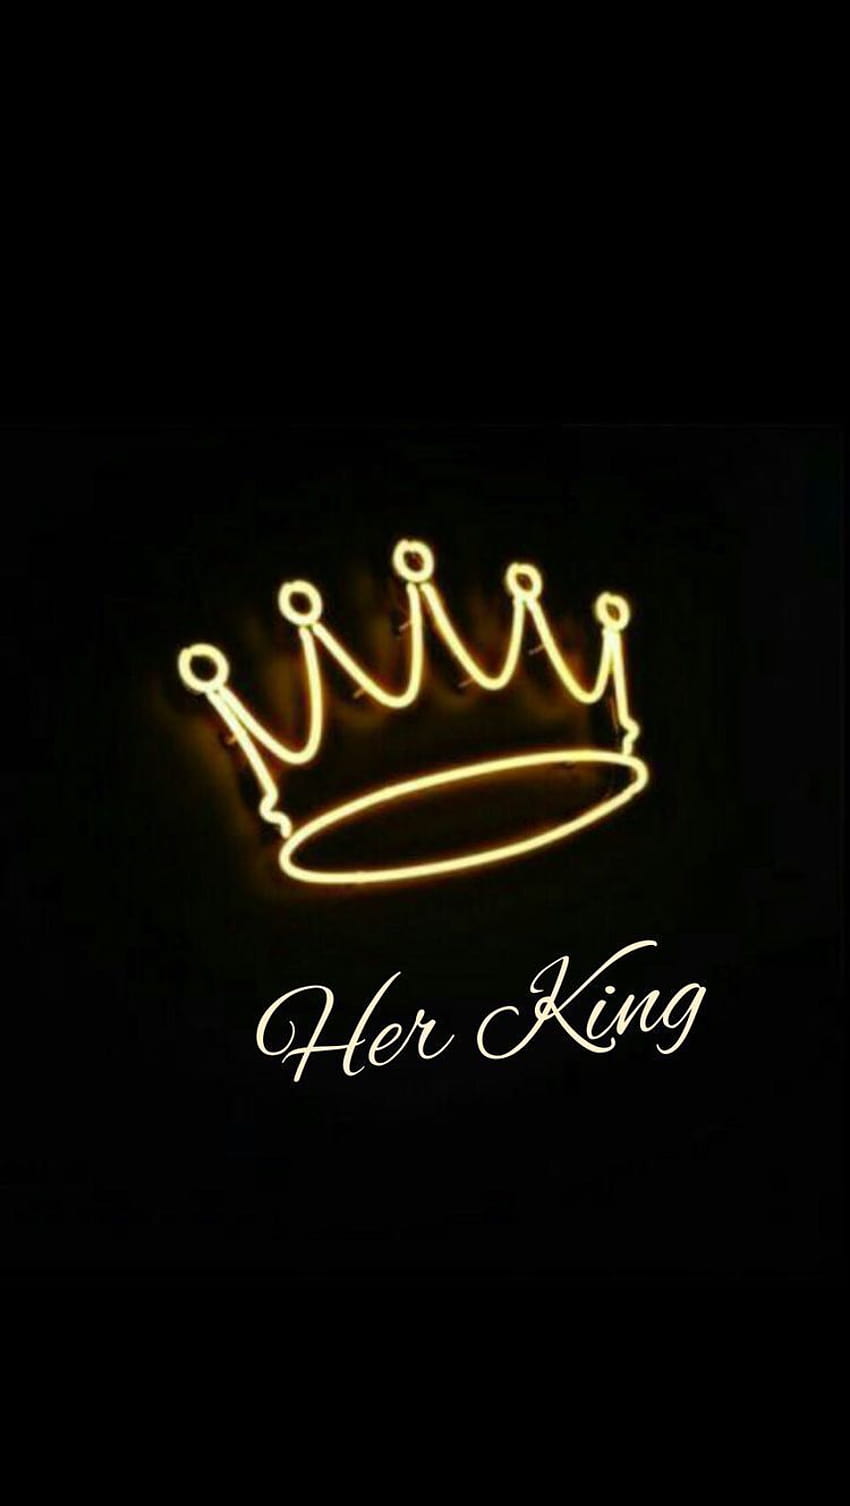 King Logo Wallpapers For Mobile  Wallpaper Cave